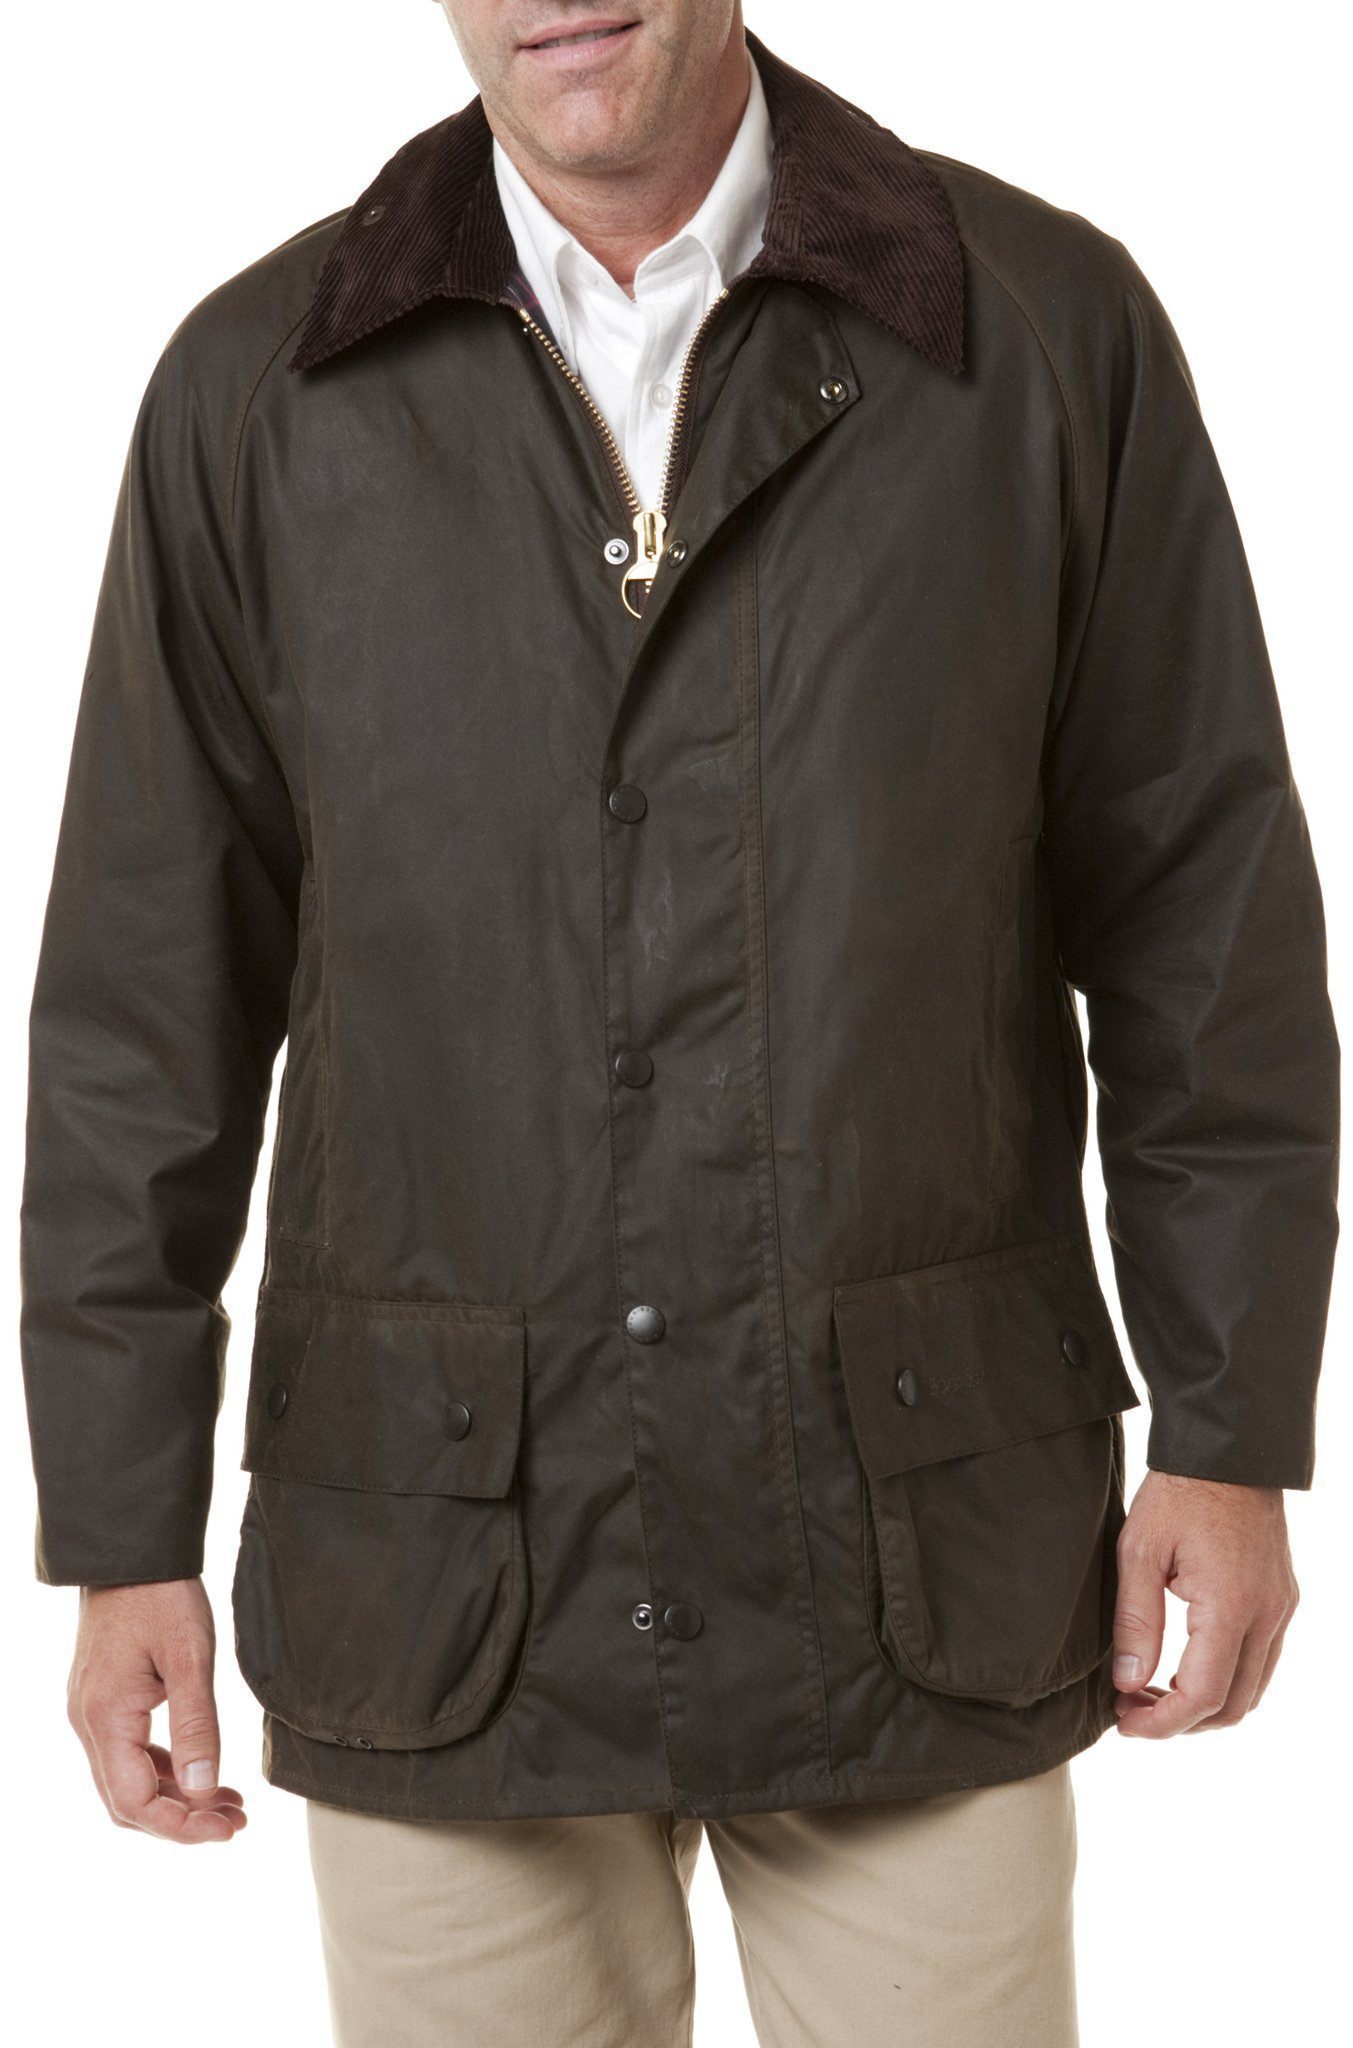 Mens and Ladies Barbour Jackets and Vests – Castaway Nantucket Island